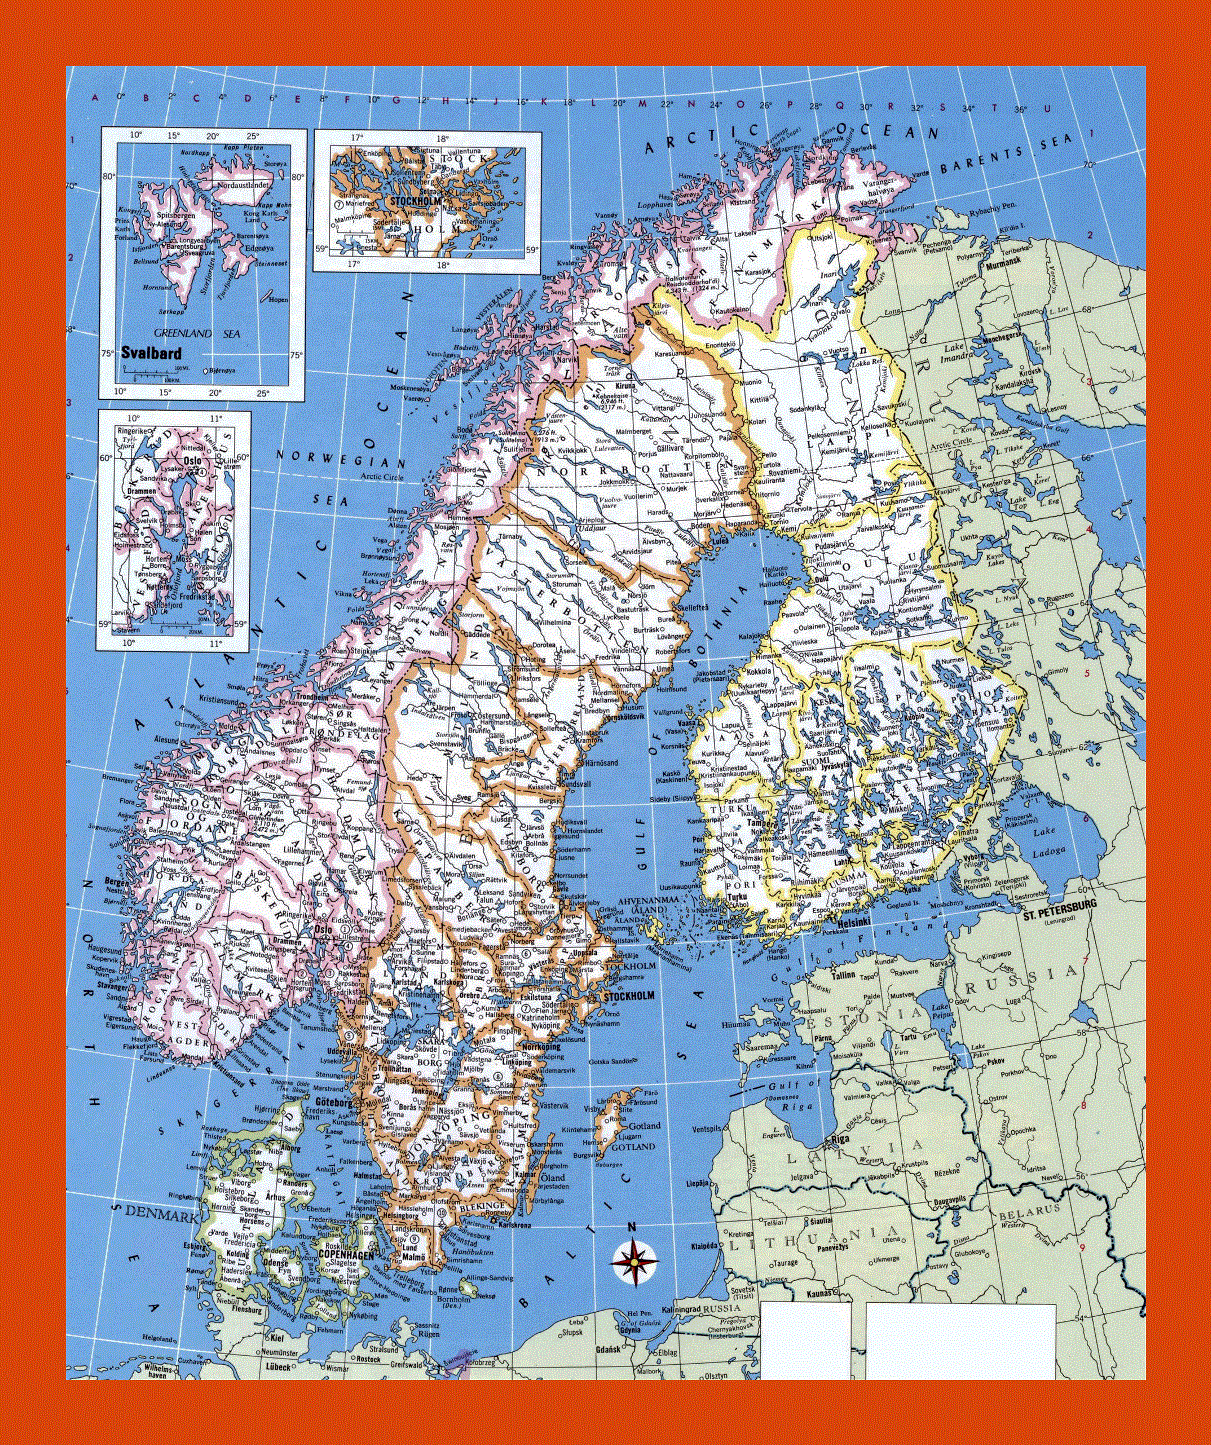 Political and administrative map of Norway, Sweden, Finland and Denmark